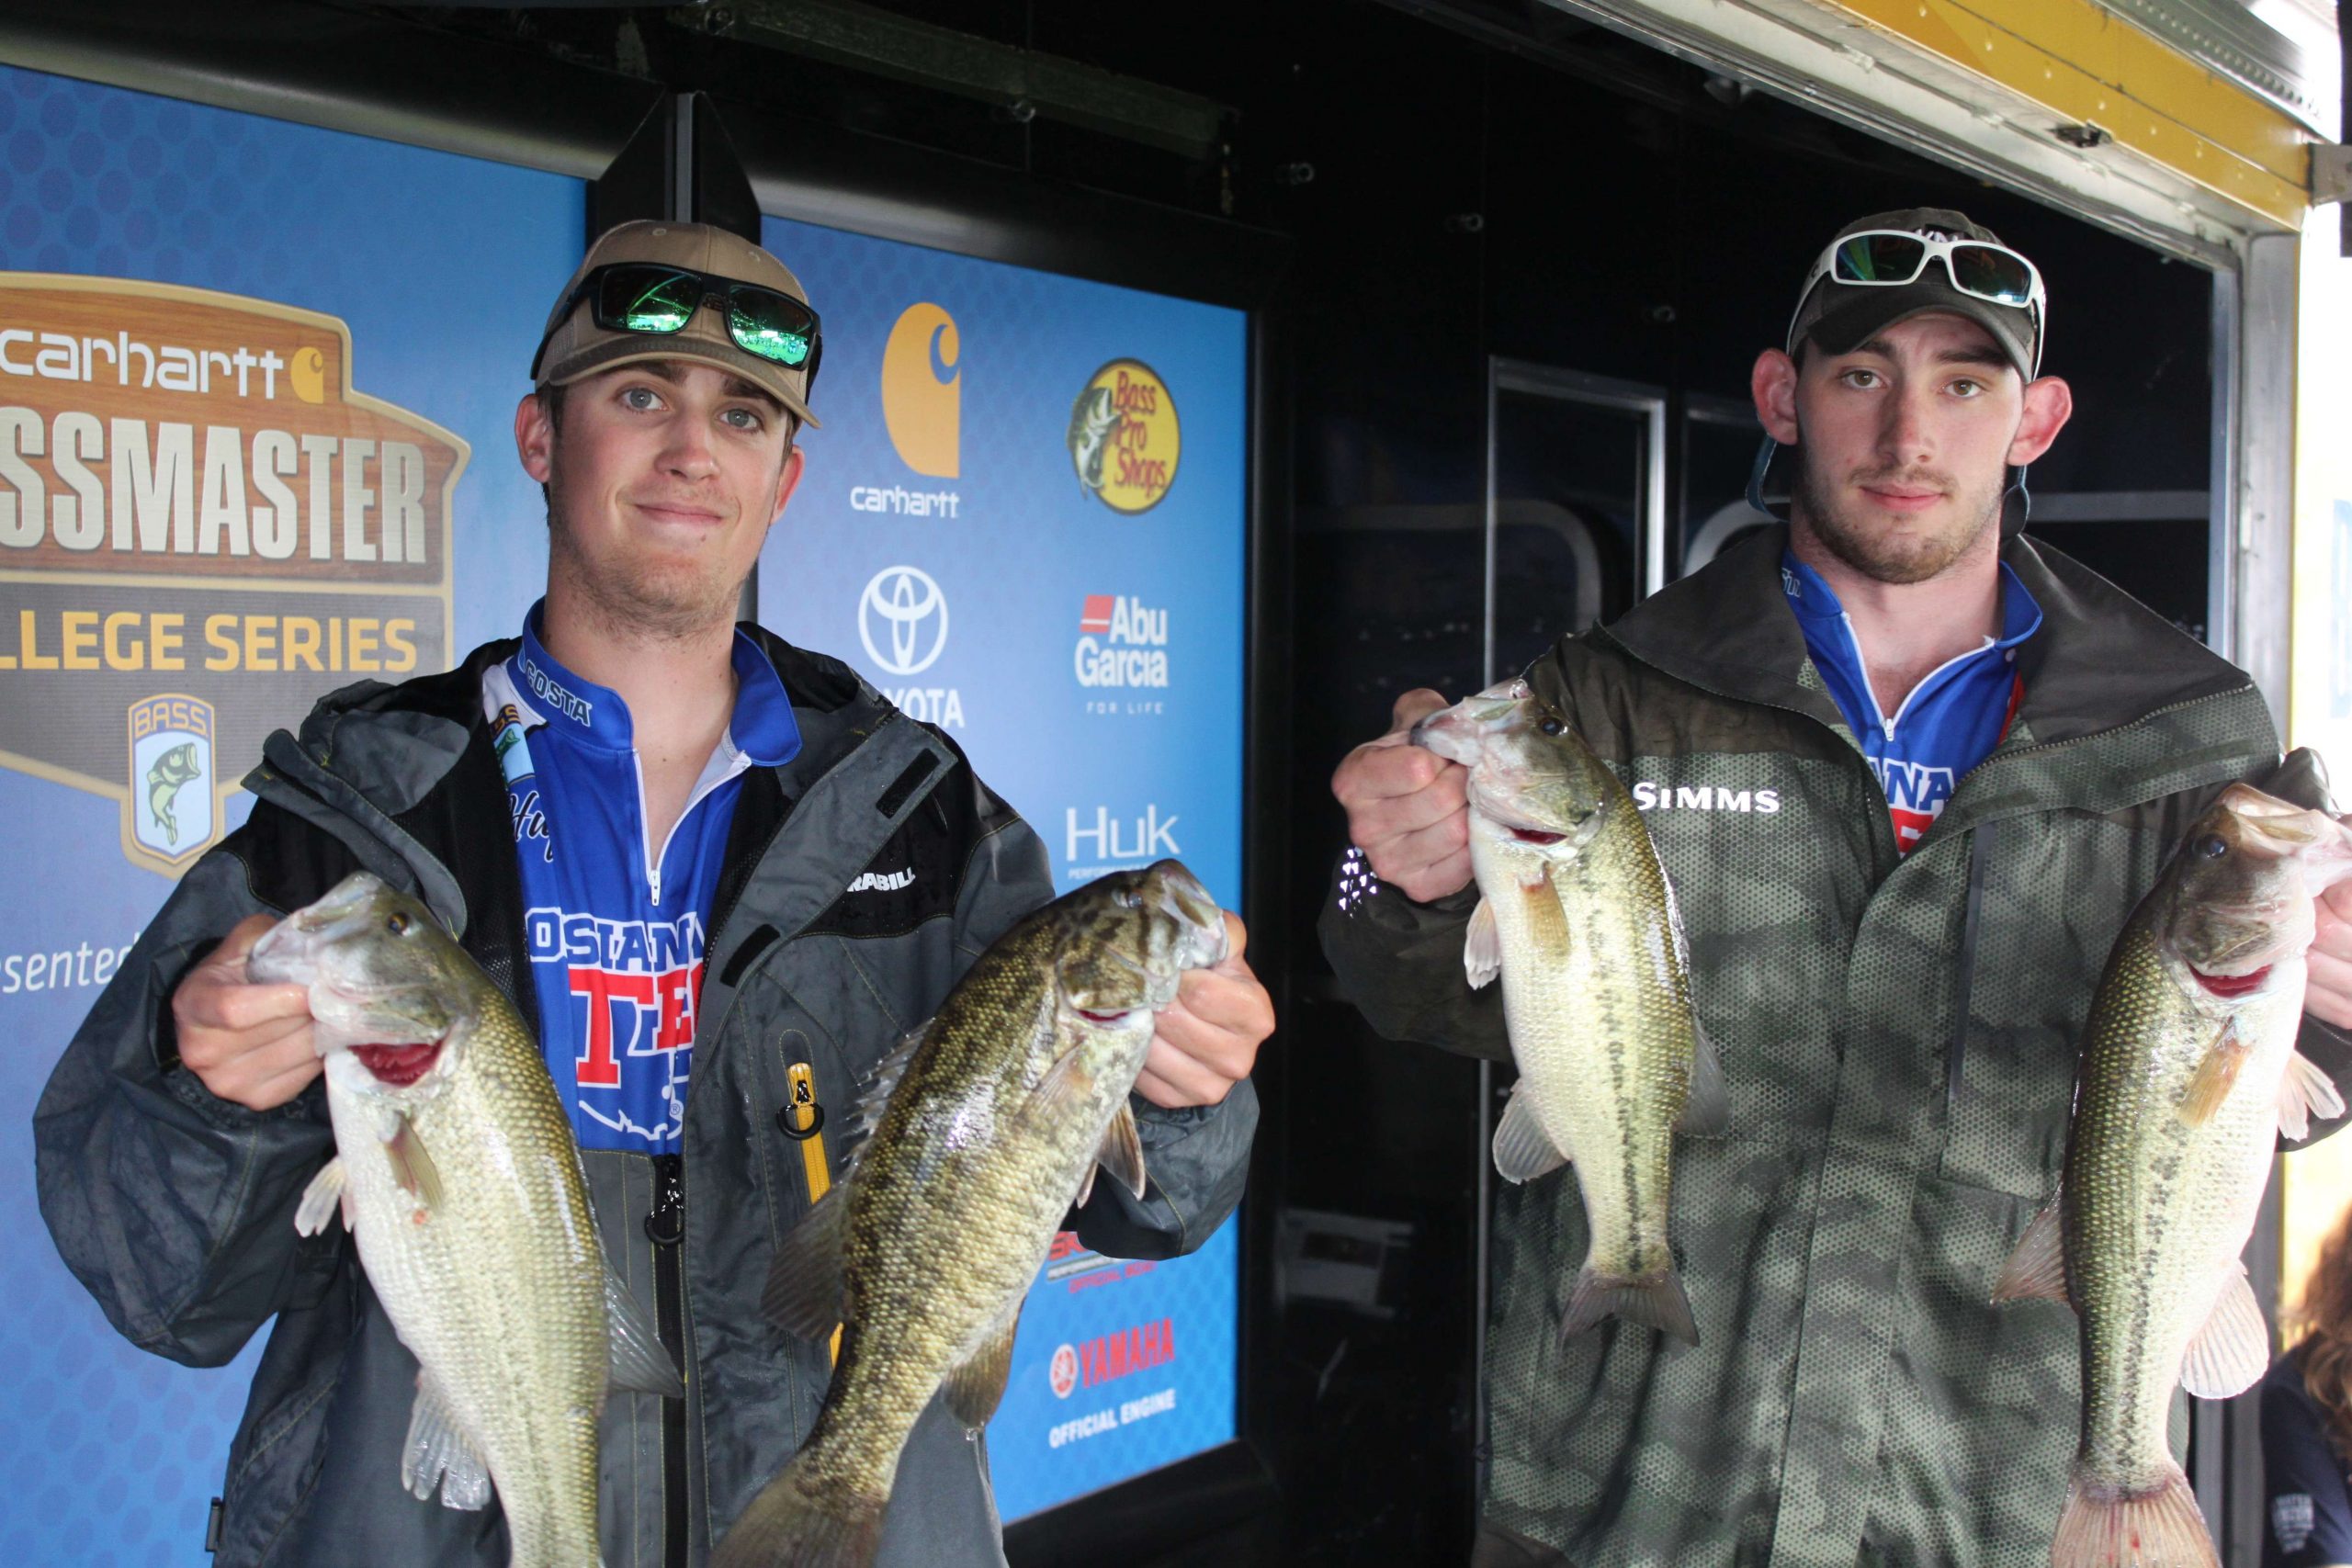 And the weigh-in is underway. Hereâs Huff McIntosh and Chris Gaudin of Louisiana Tech who kicked the day off with a five-bass limit that weighed 12 pounds, 3 ounces; good enough to tie for 47th place. When the weigh-in concluded there would be 146 limits caught in the 263-boat field. Many of them slotted nicely into that 13, 12 and 11-pound range which is sure to make the rush to Fridayâs cut intense.